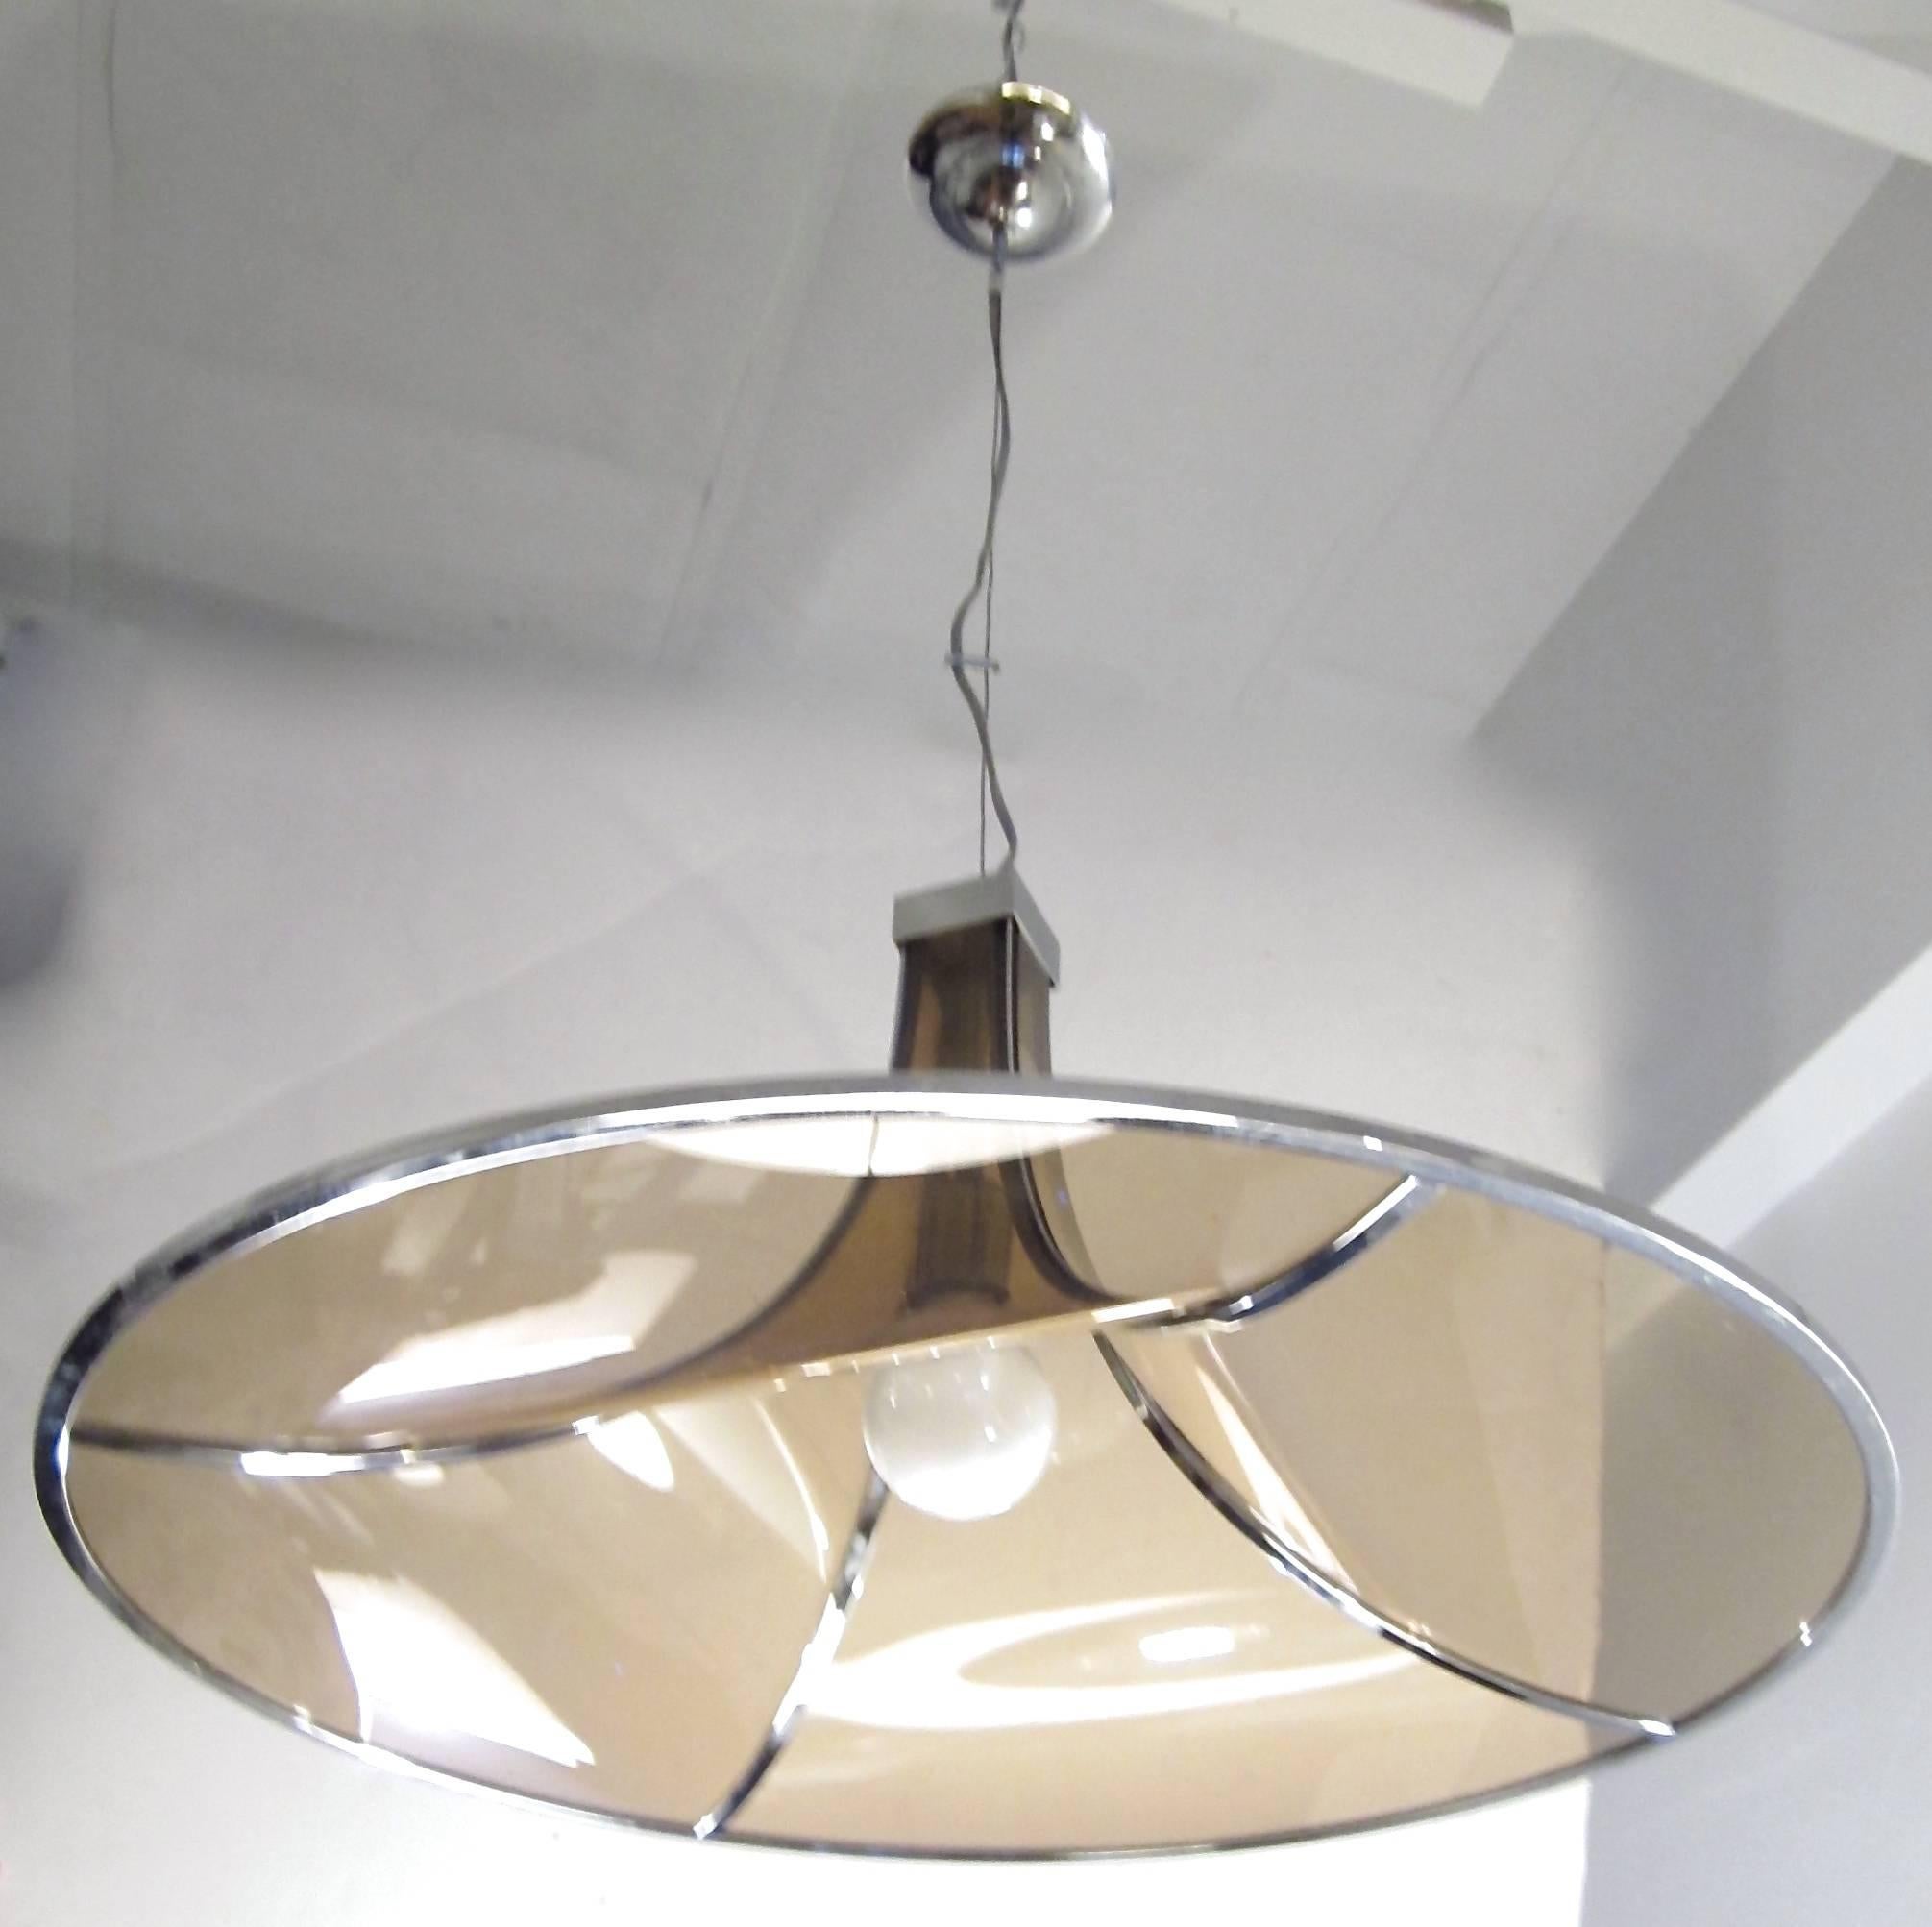 Italian amber glass and chrome hanging pendant with cable up to chrome canopy. Rewired to US Standards. Takes one standard base lightbulb up to 150W.